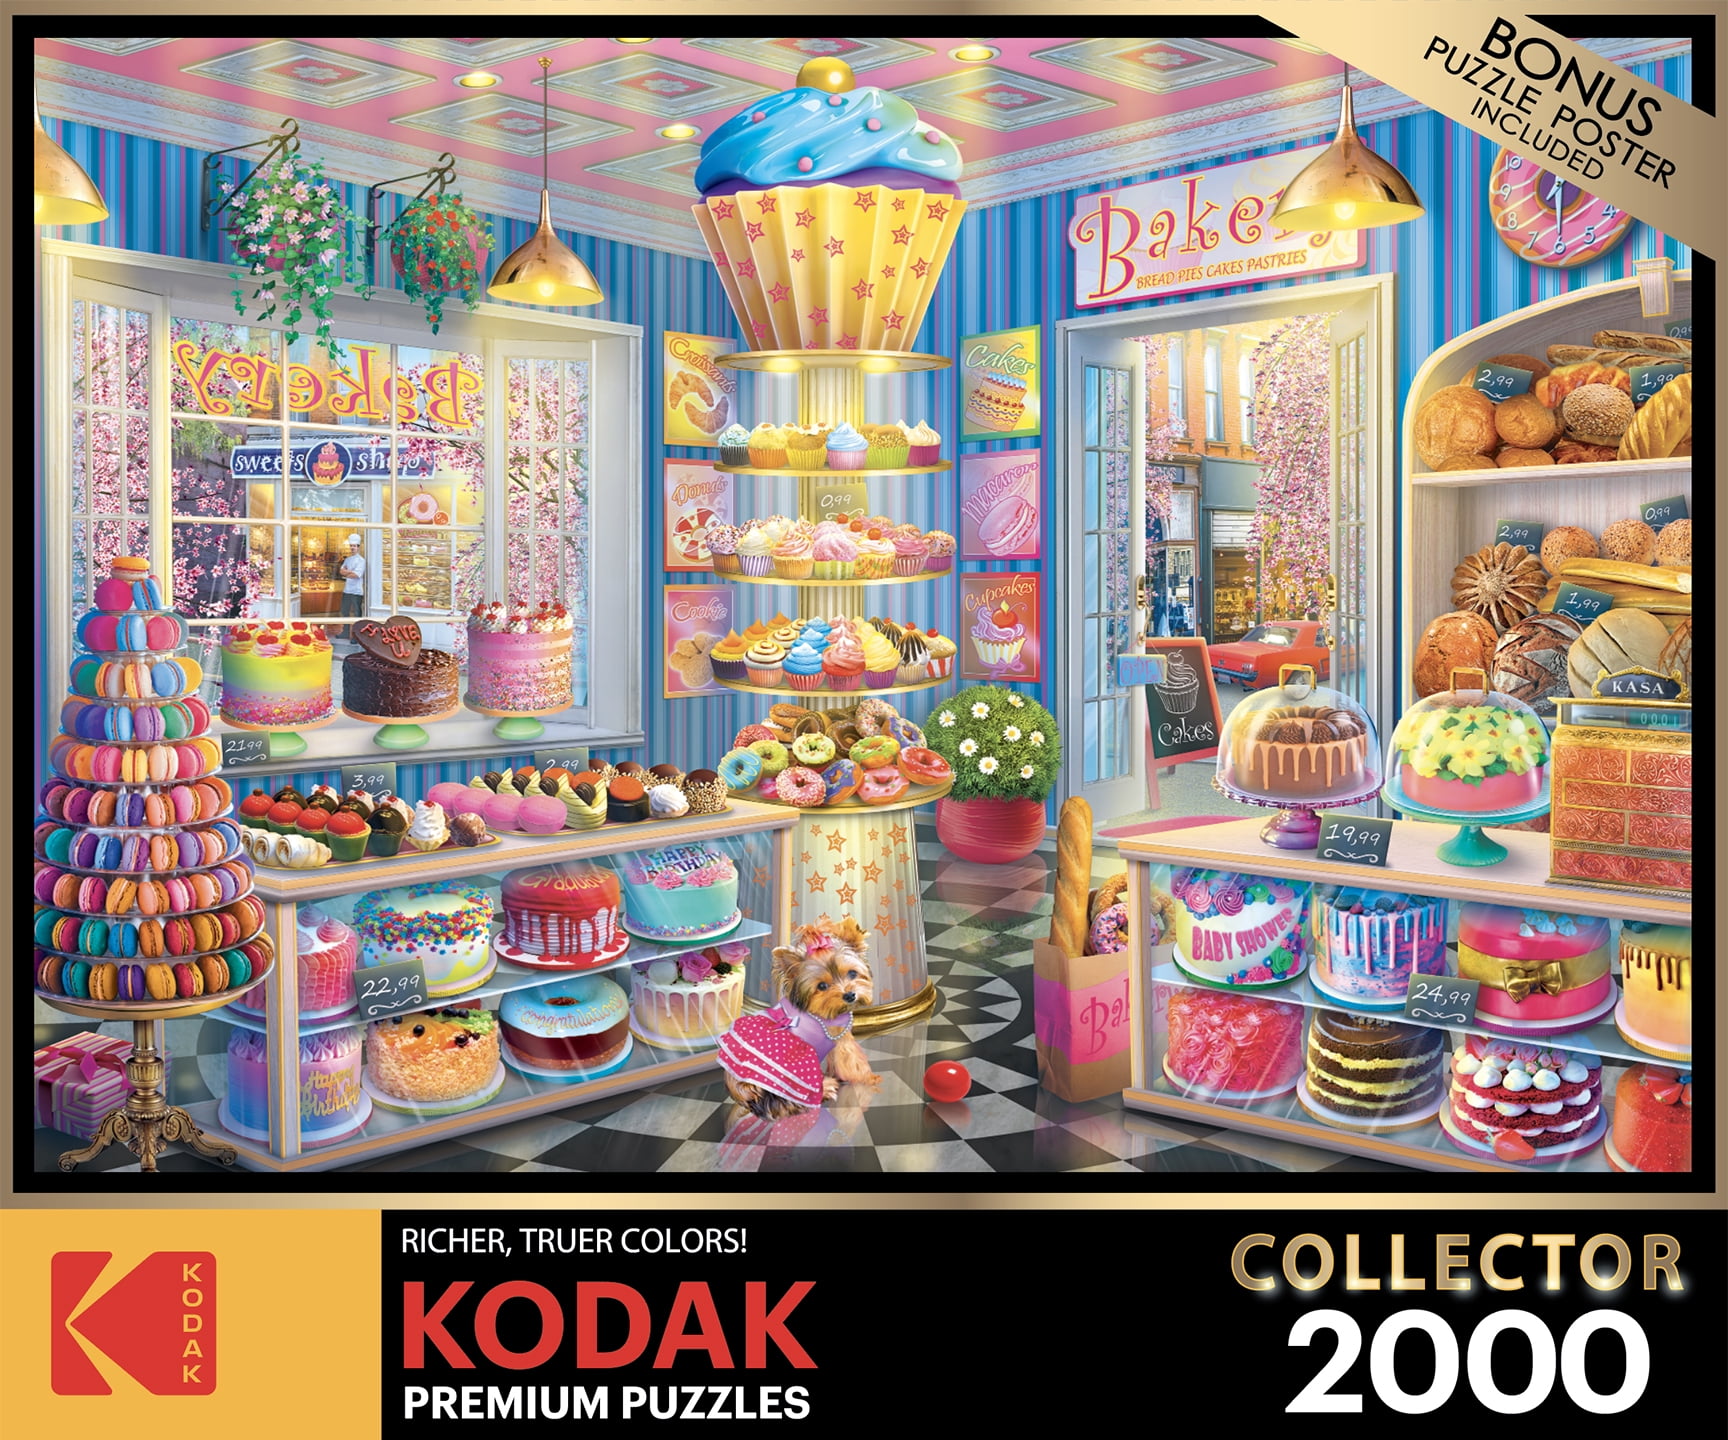 Buffalo Games 2000 Piece Jigsaw Puzzle 38 in x 26 in SWEET TREATS Candy shop